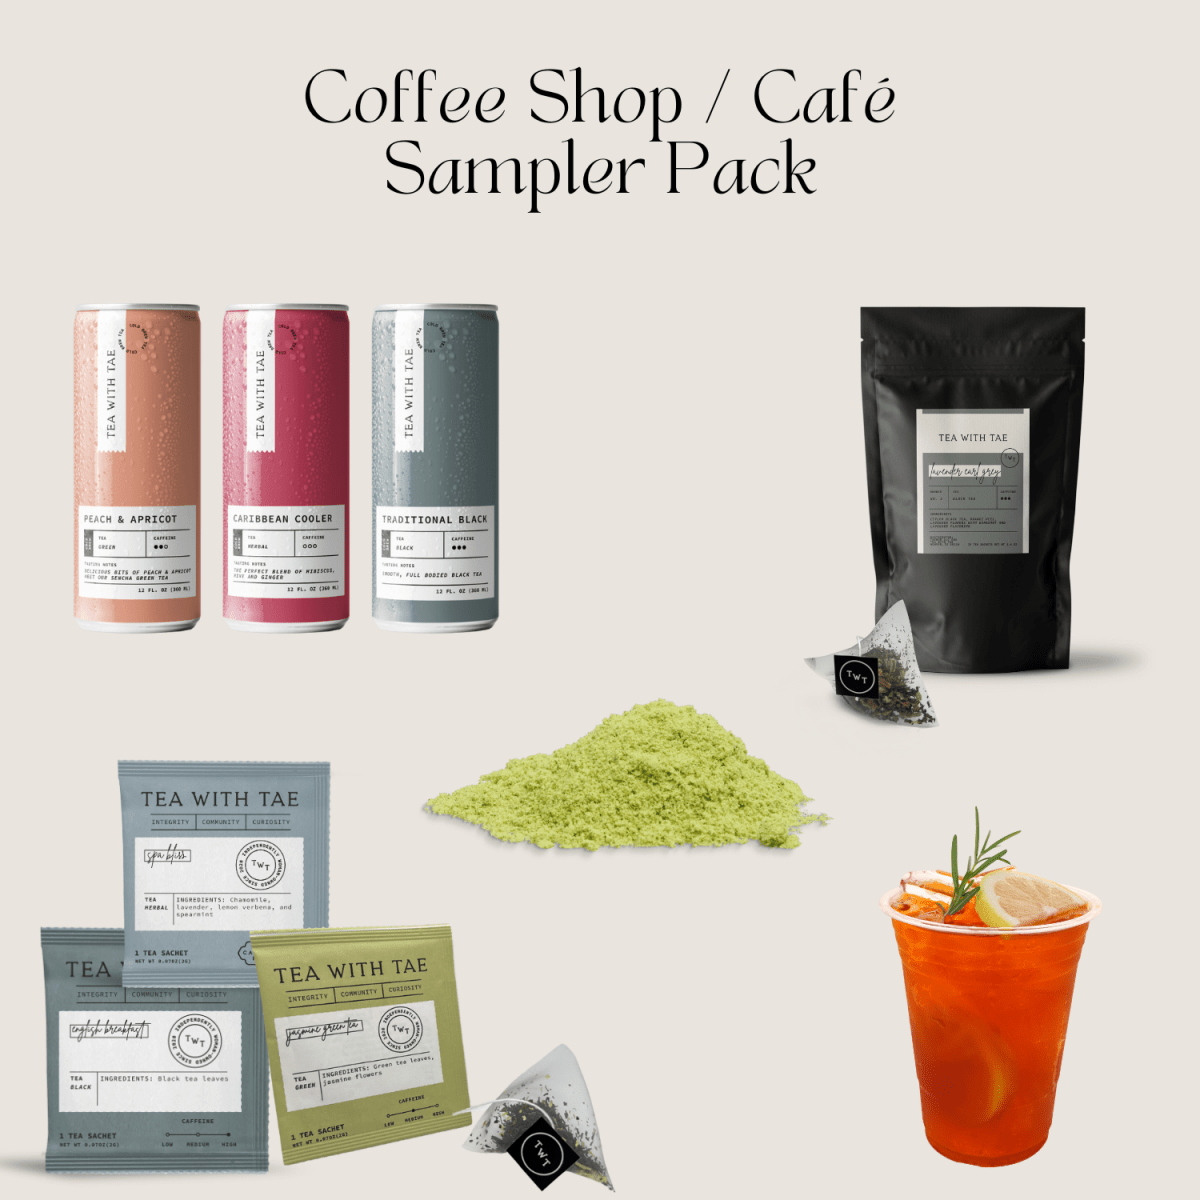 Wholesale Coffee Shop / Cafe Sampler Pack - Tea with Tae